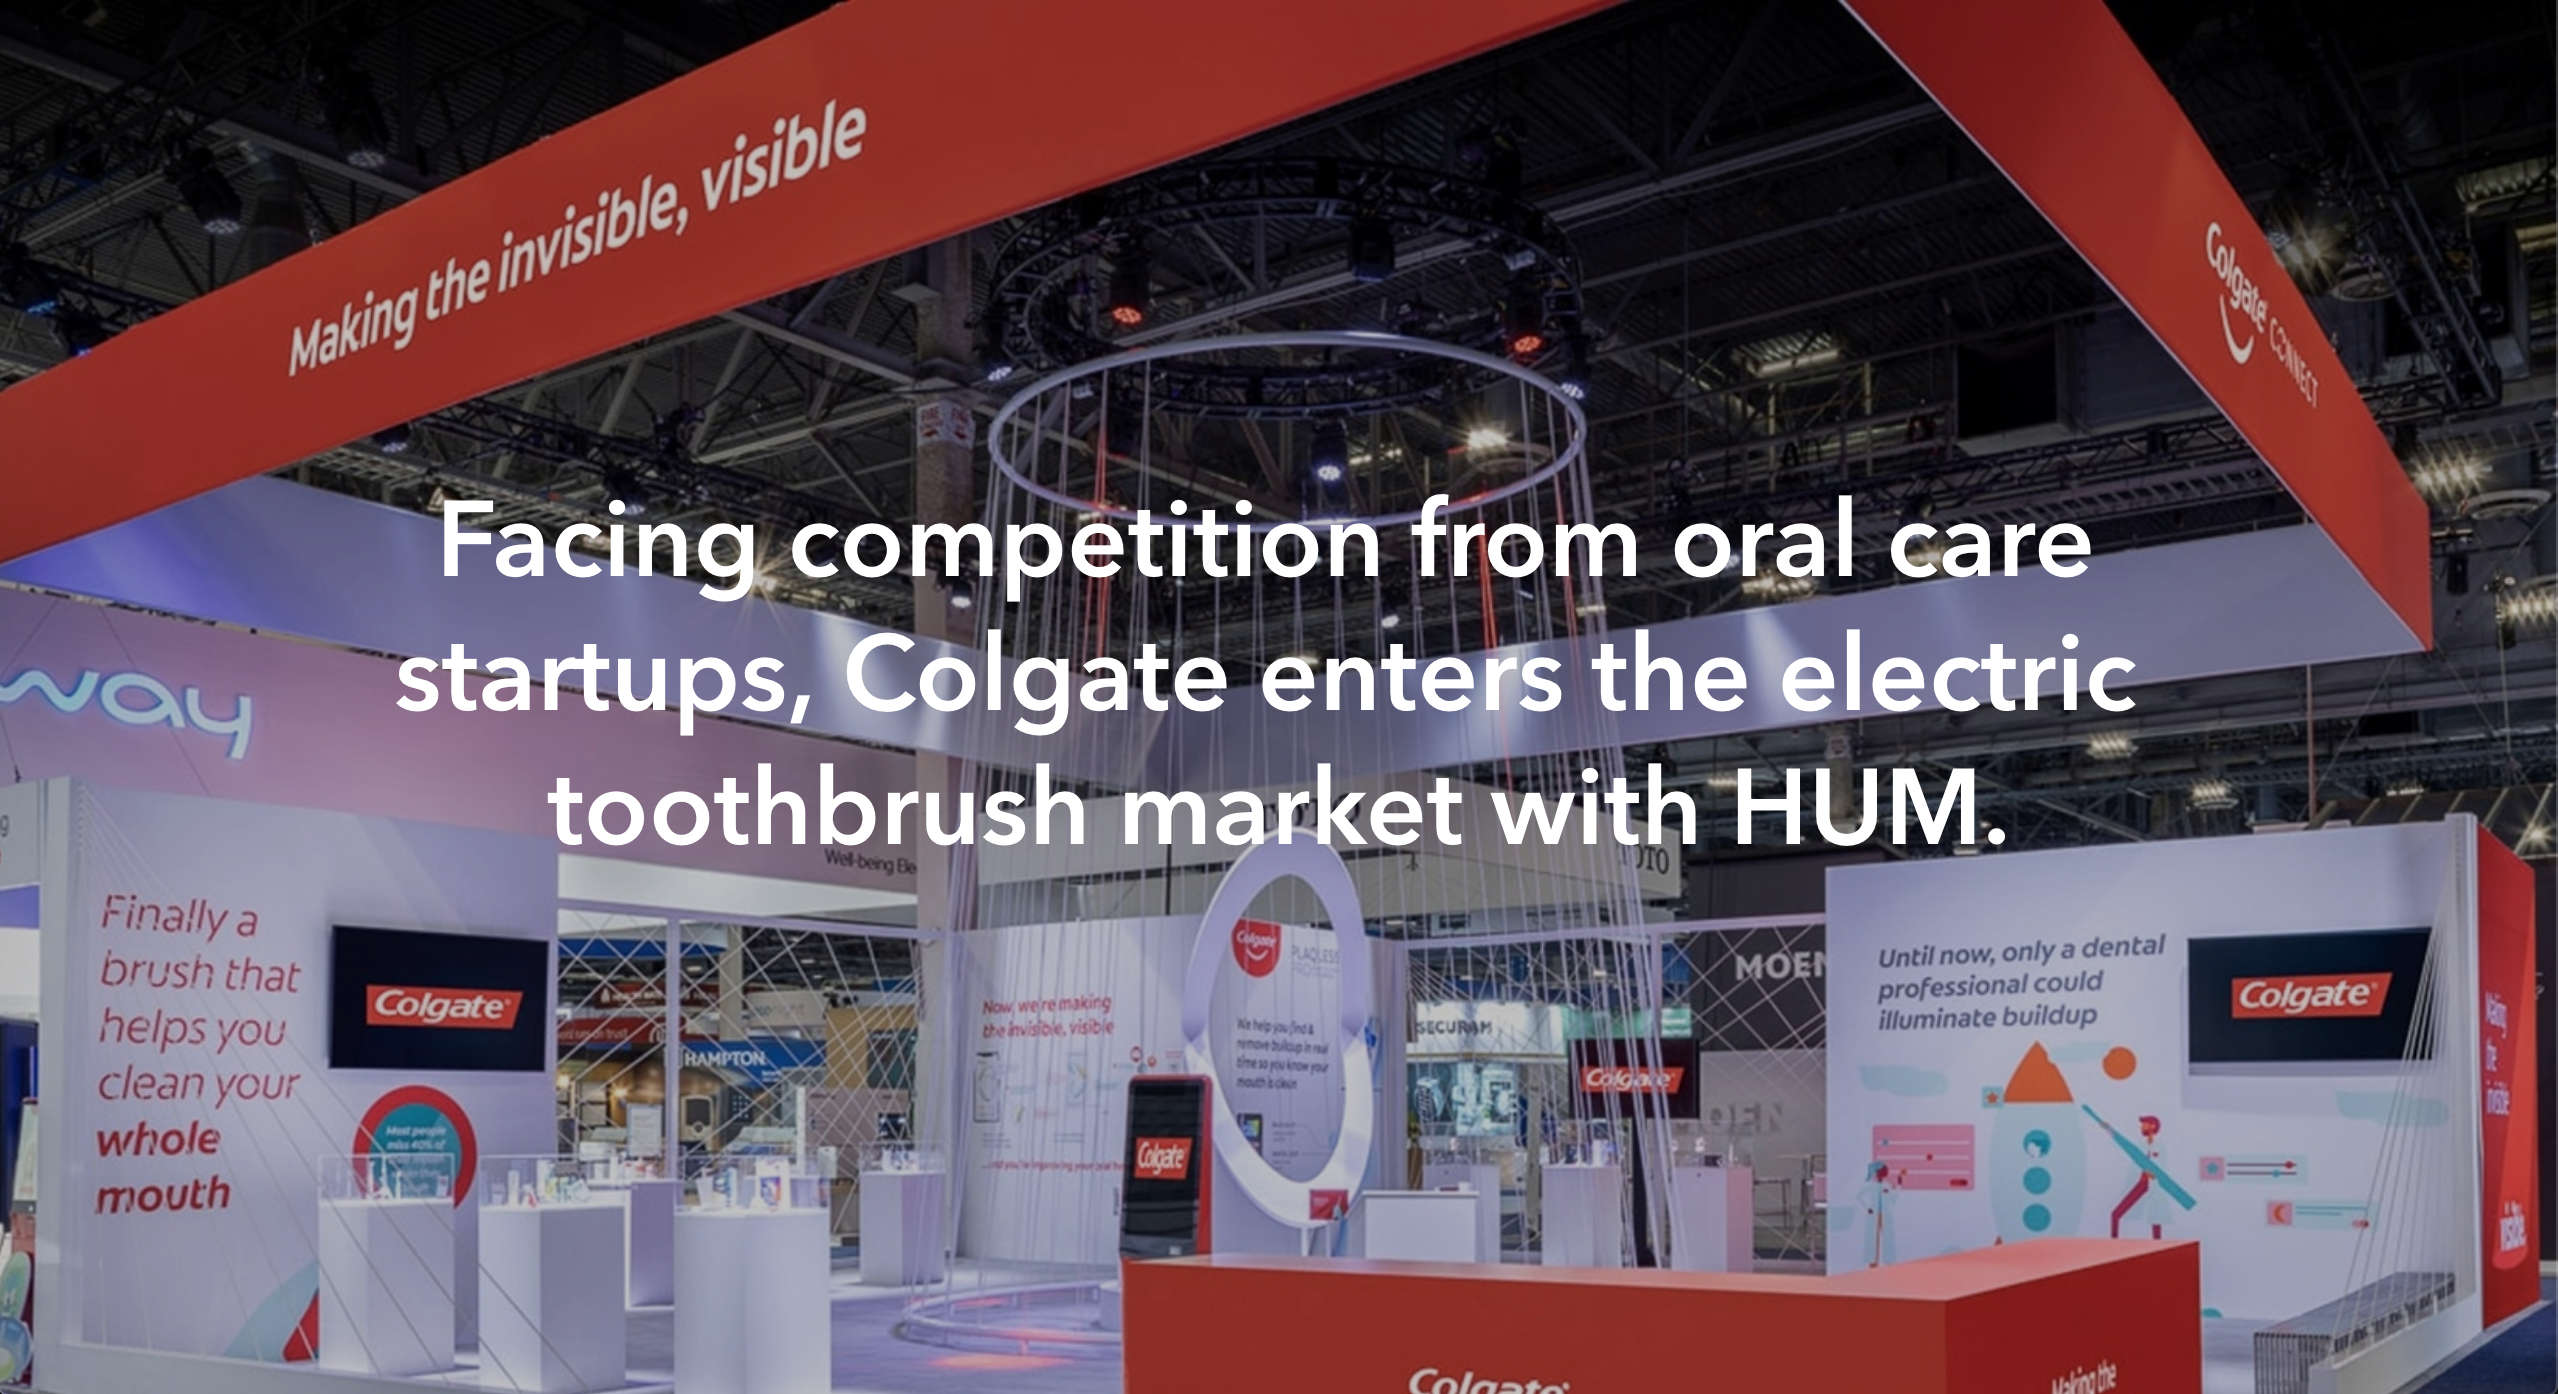 colgate's motivation for entering the electric toothbrush space